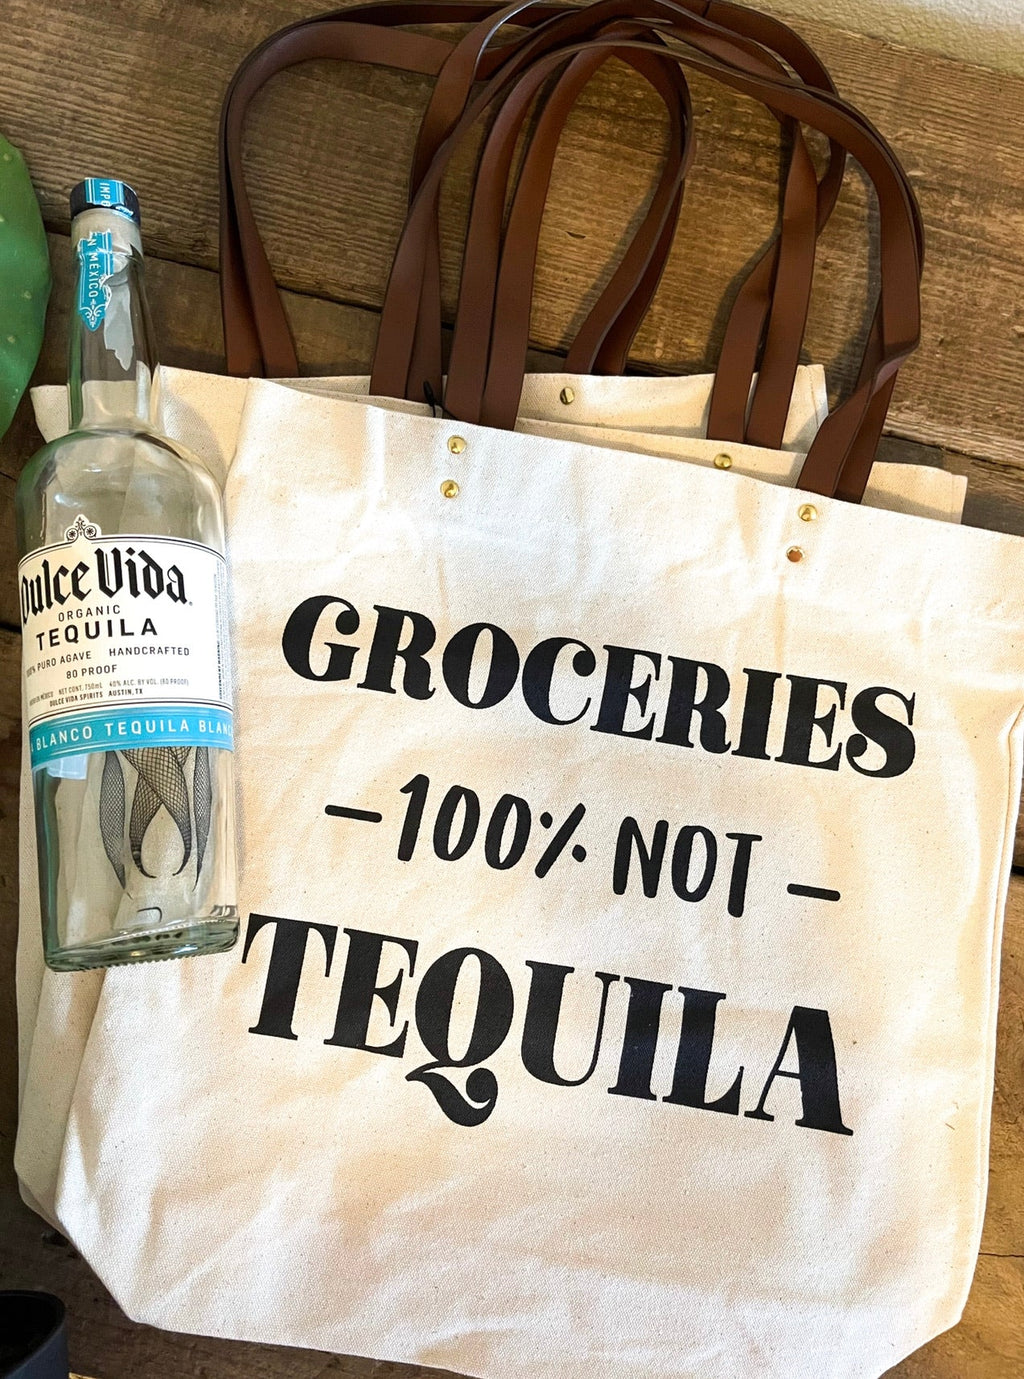 “Groceries - 100% NOT - Tequila” Tote